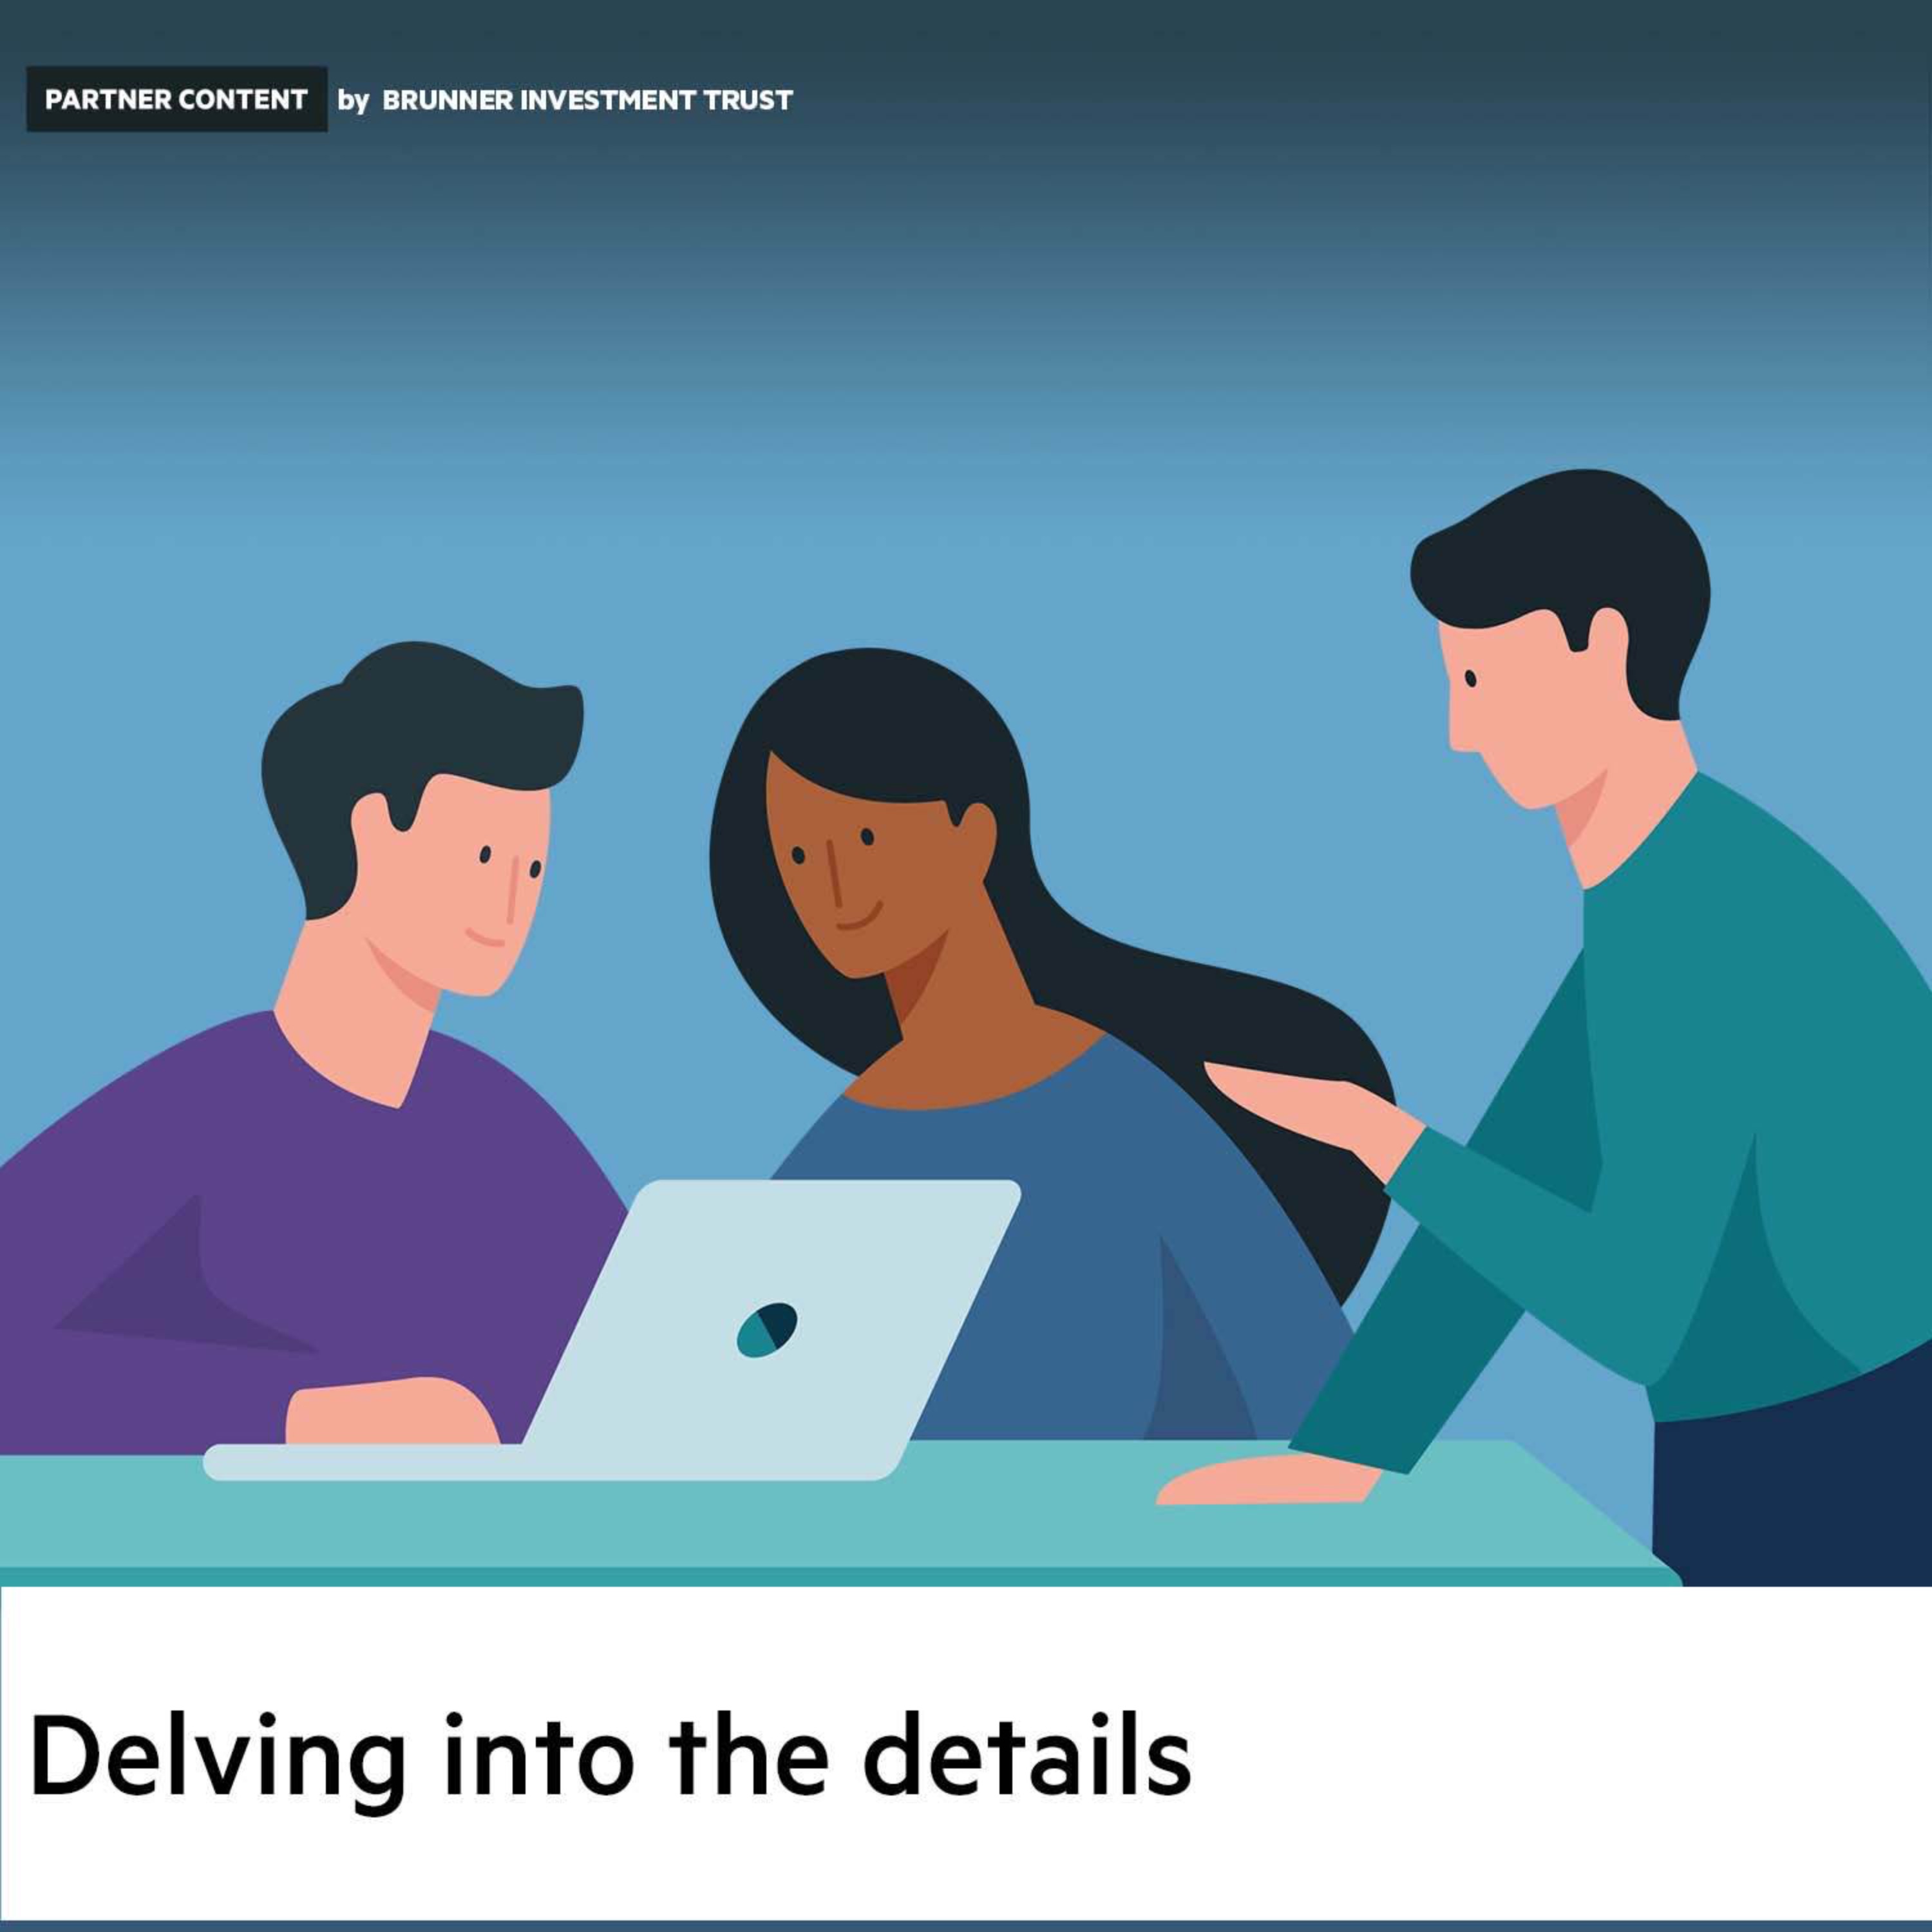 Partner Content: Delving into the details